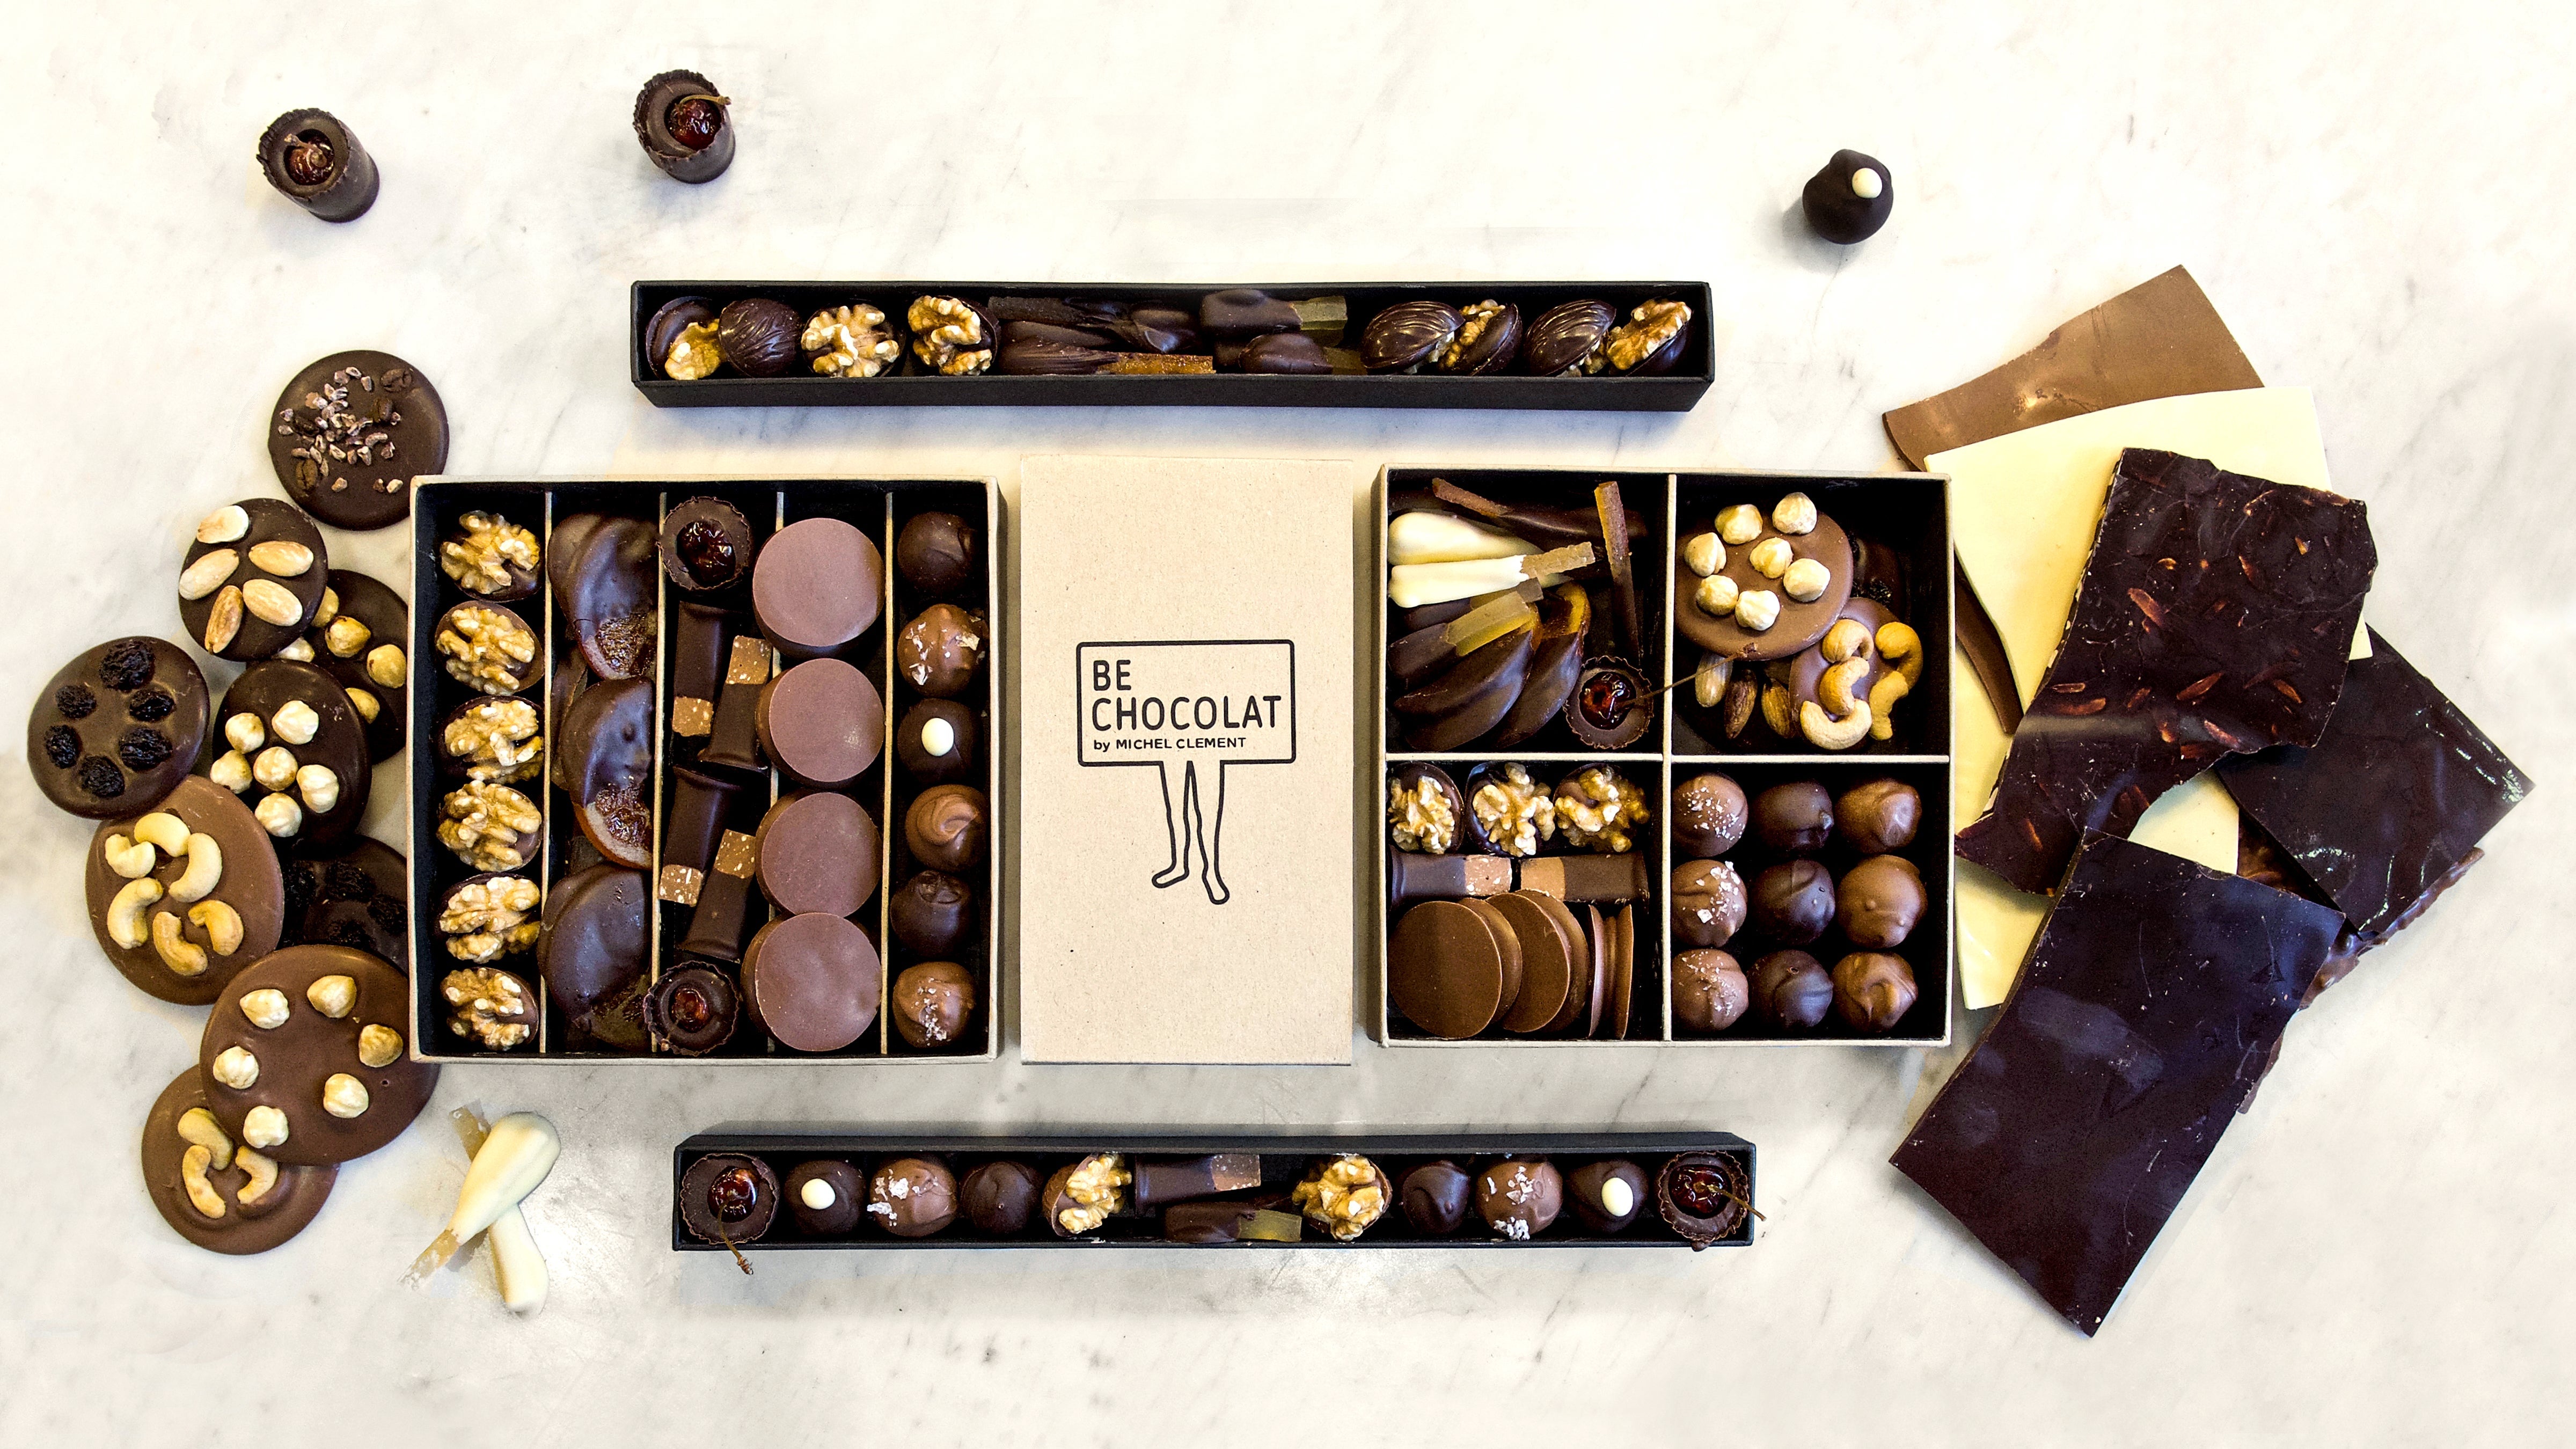 Be Chocolat by Michel Clement